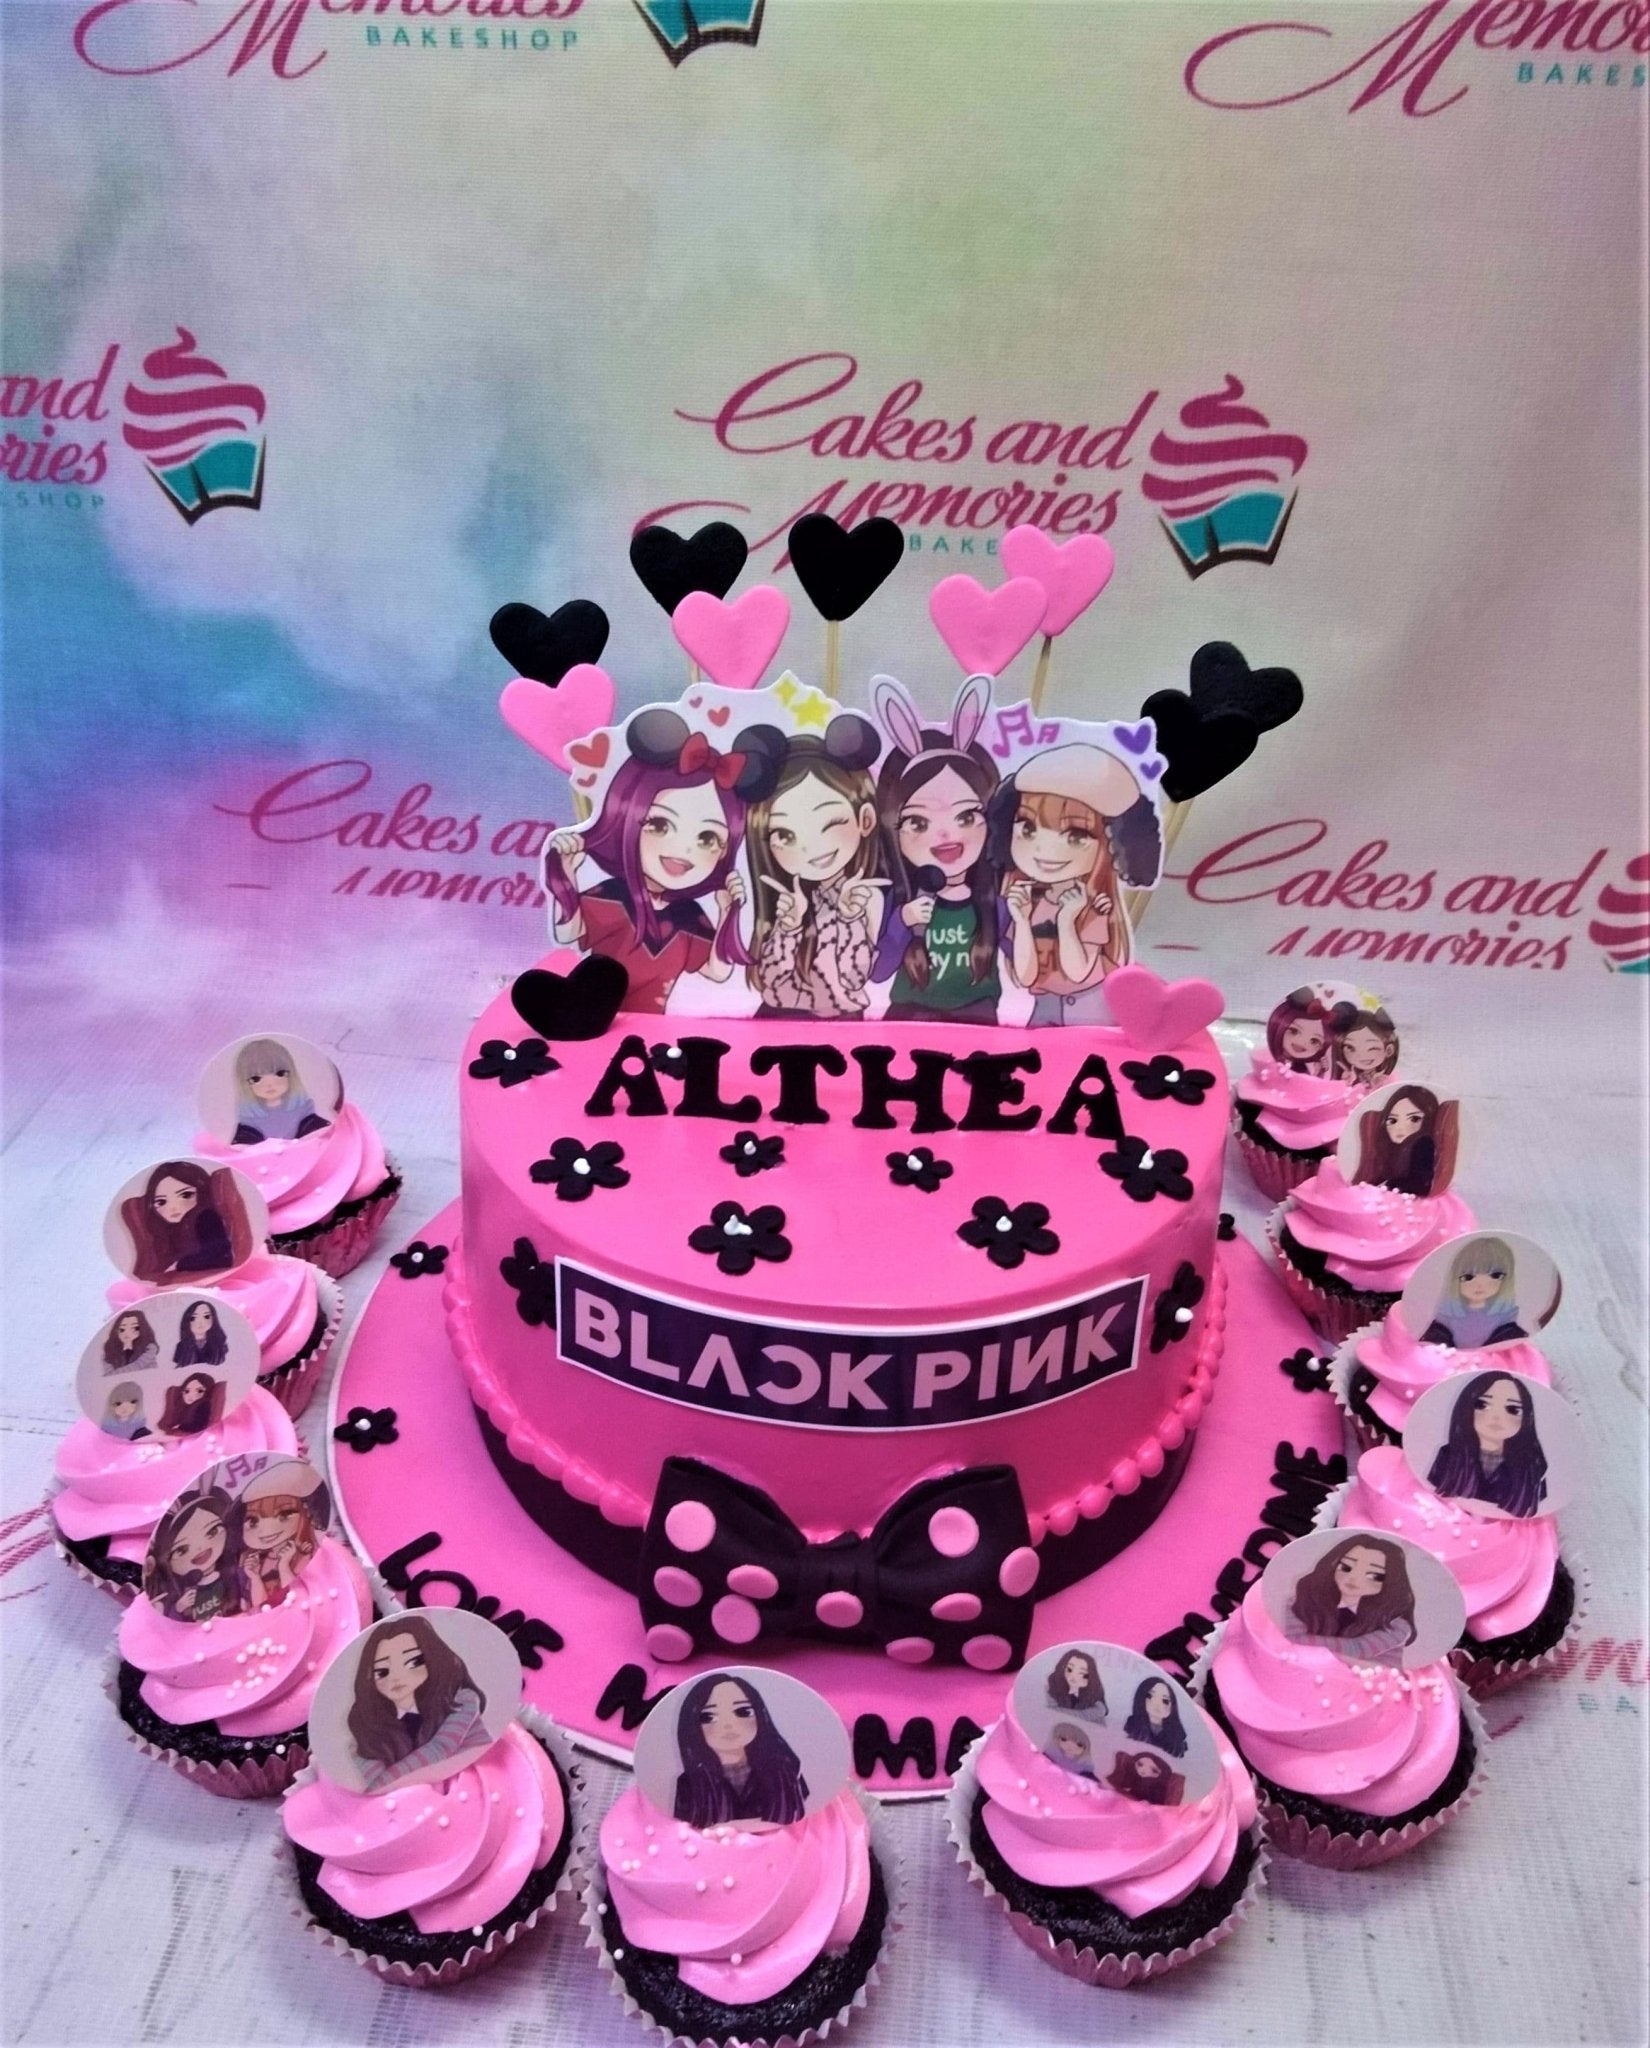 Blackpink Theme Cake | Bakers Oven - Order Online Now